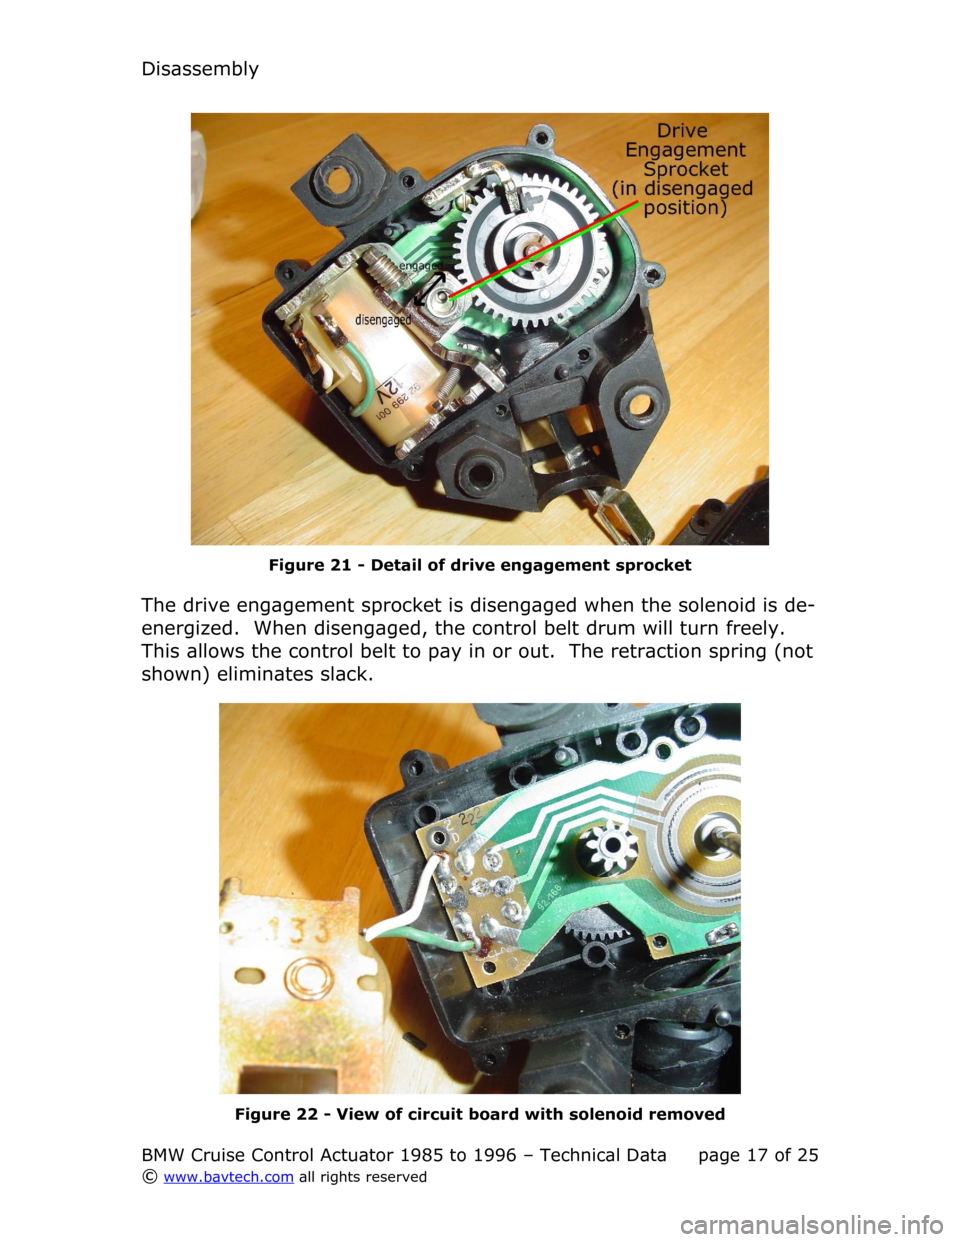 BMW 3 SERIES 1992 E36 Cruise Control Acutator Disassembly
Figure  21  - Detail of drive engagement sprocket
The drive engagement sprocket is disengaged when the solenoid is de-
energized.  When disengaged, the control belt drum will turn freely. 